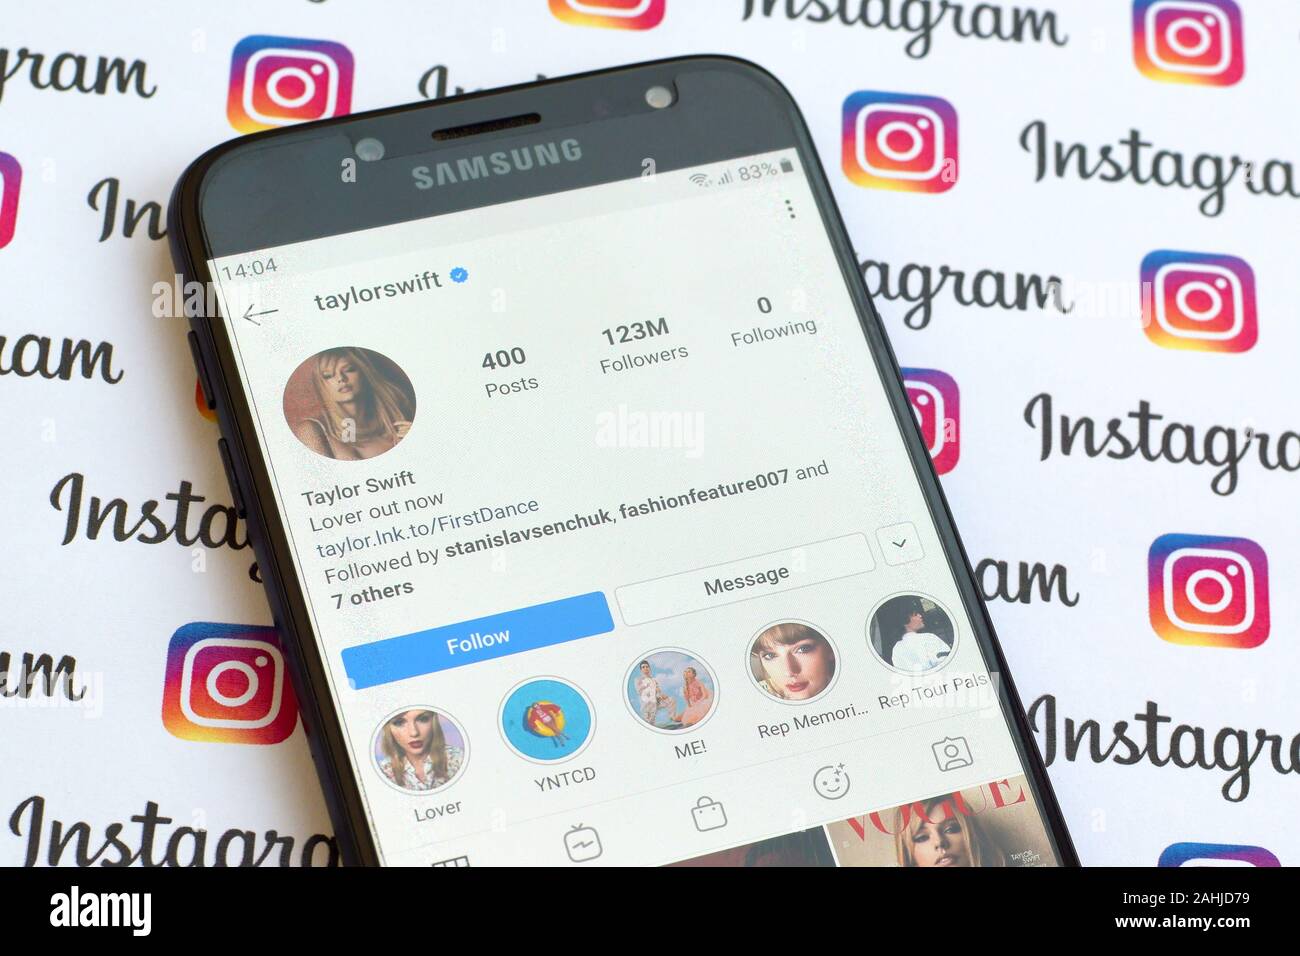 NY, USA - DECEMBER 4, 2019: Taylor Swift official instagram account on smartphone screen on paper instagram banner. Stock Photo